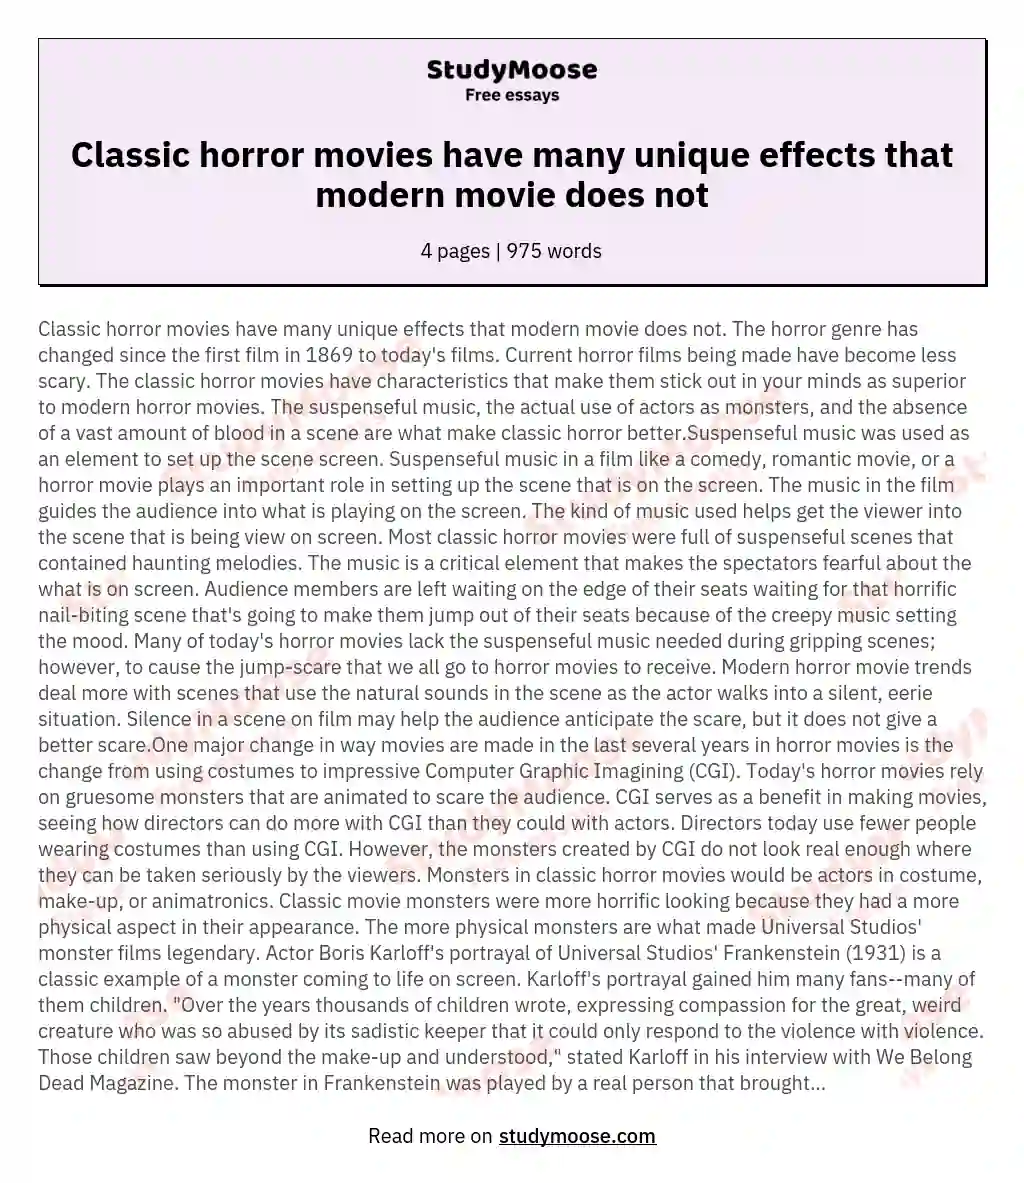 Classic horror movies have many unique effects that modern movie does not